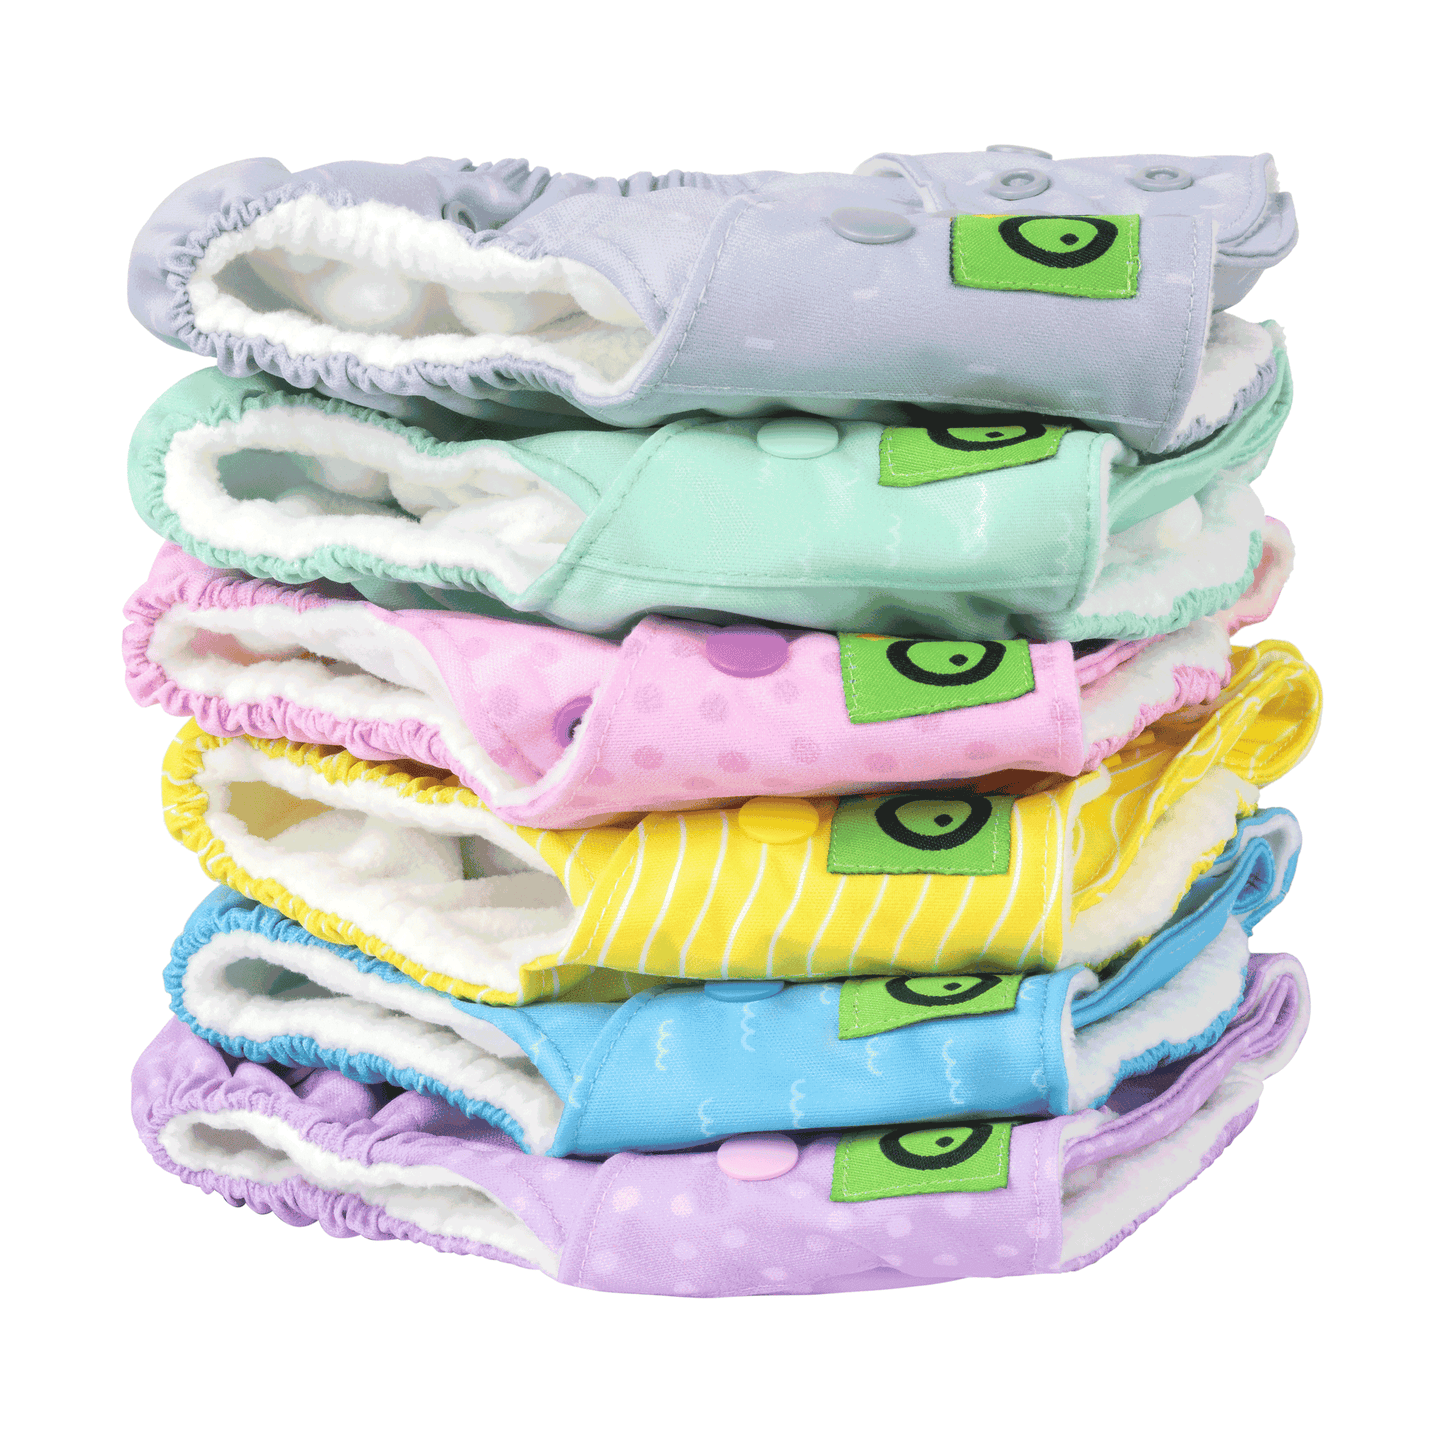 Zoocchini Reusable Cloth Pocket Diapers with 2 Inserts - Alicorn - Laadlee